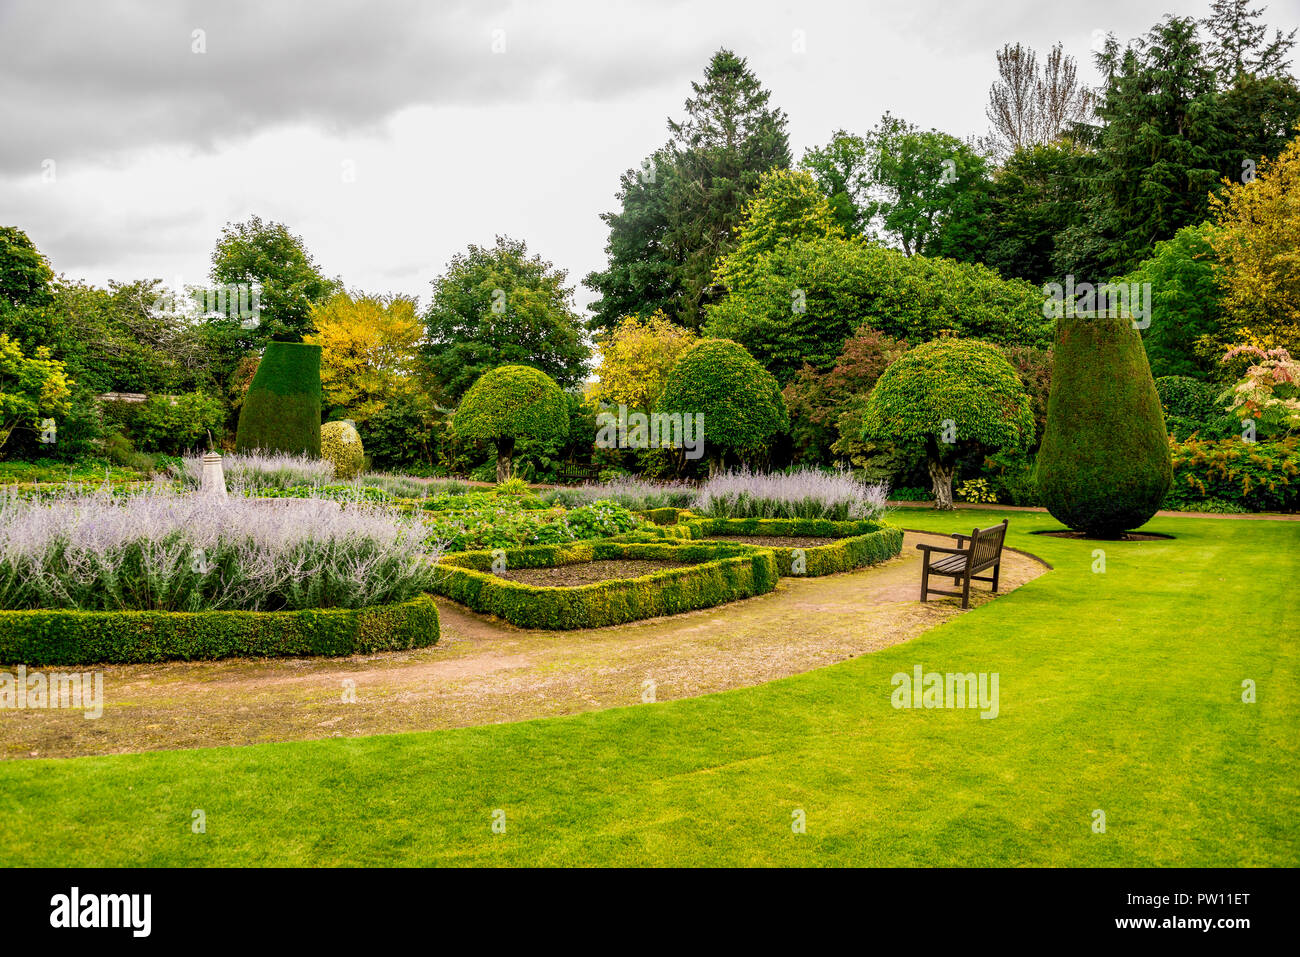 Flower beds and a bench in outdoor gardens at Crathes Castle estate near Banchory, Scotland Stock Photo